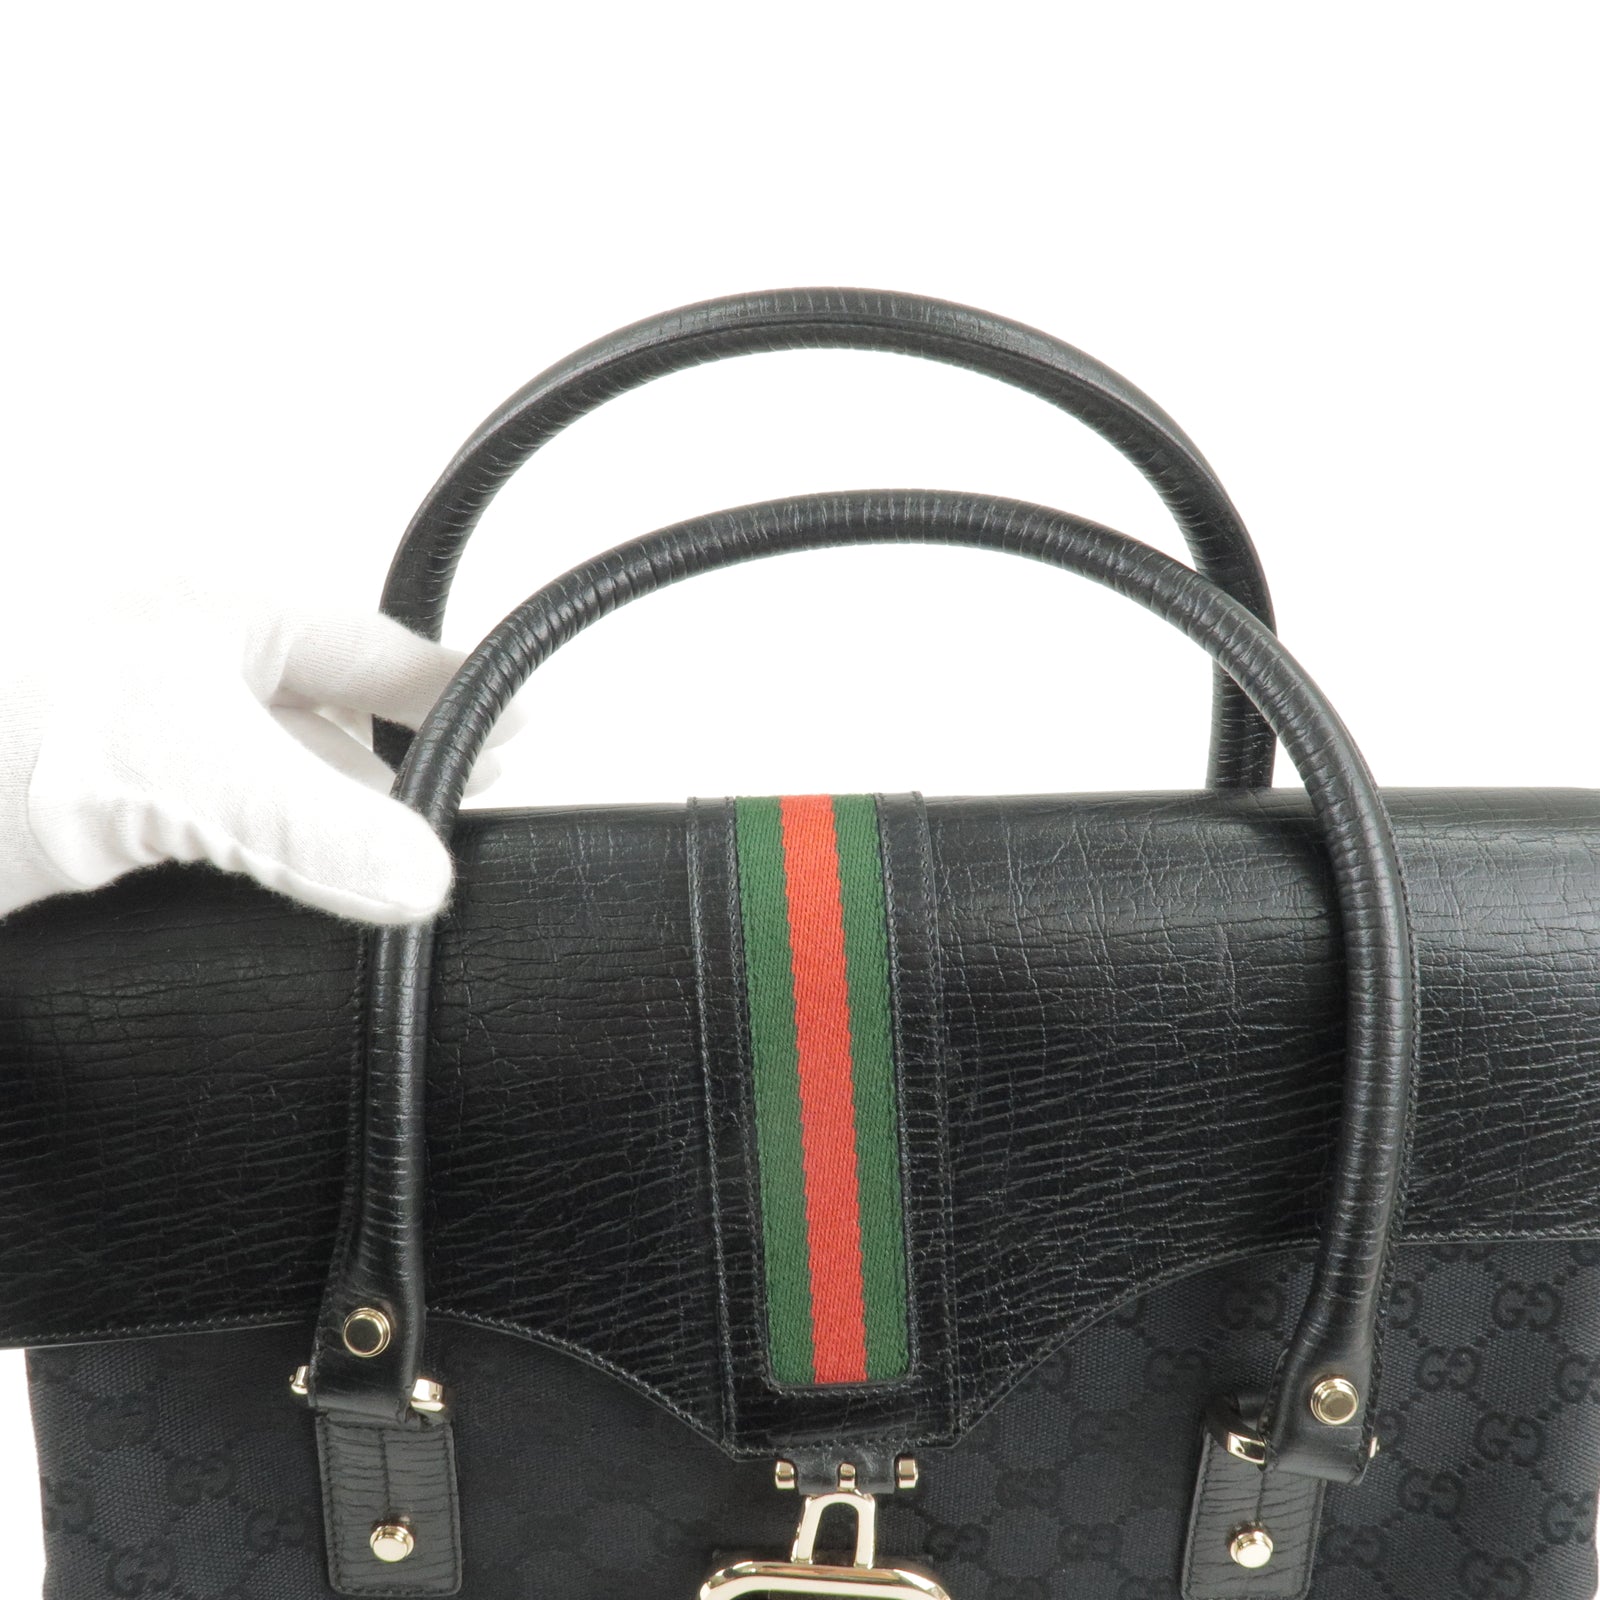 Gucci, Dog, Gucci Sherry Line Logo Dog Carrier Excellent Condition